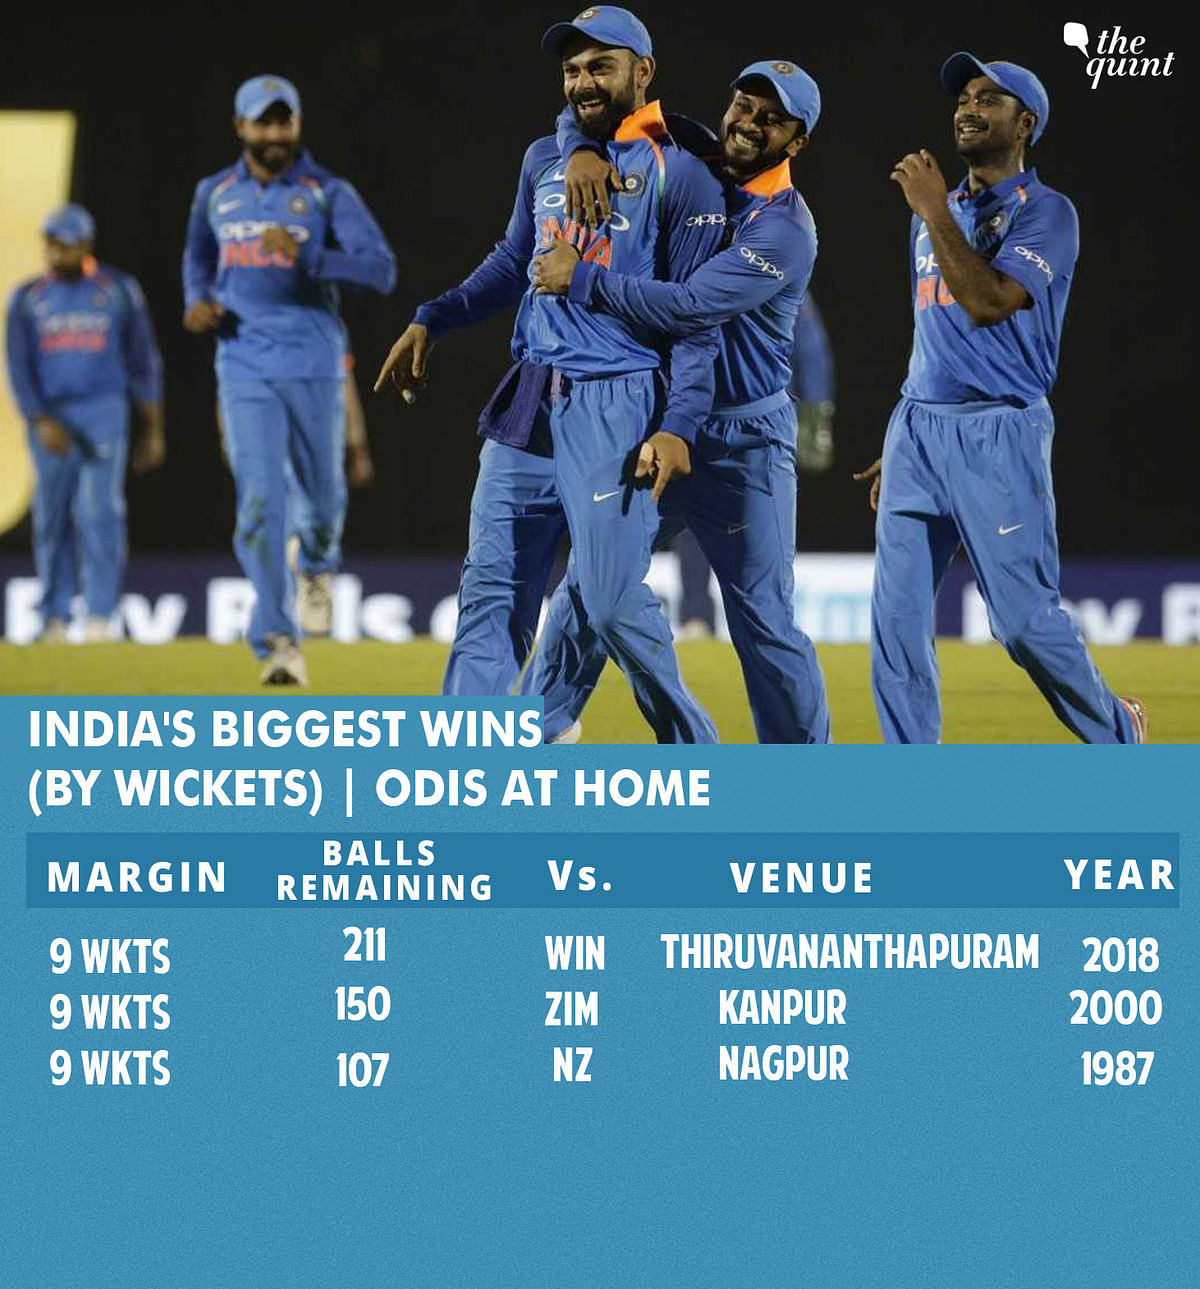 Prithvi Shaw, Virat Kohli and Rohit Sharma broke multiple records during the home games against West Indies.